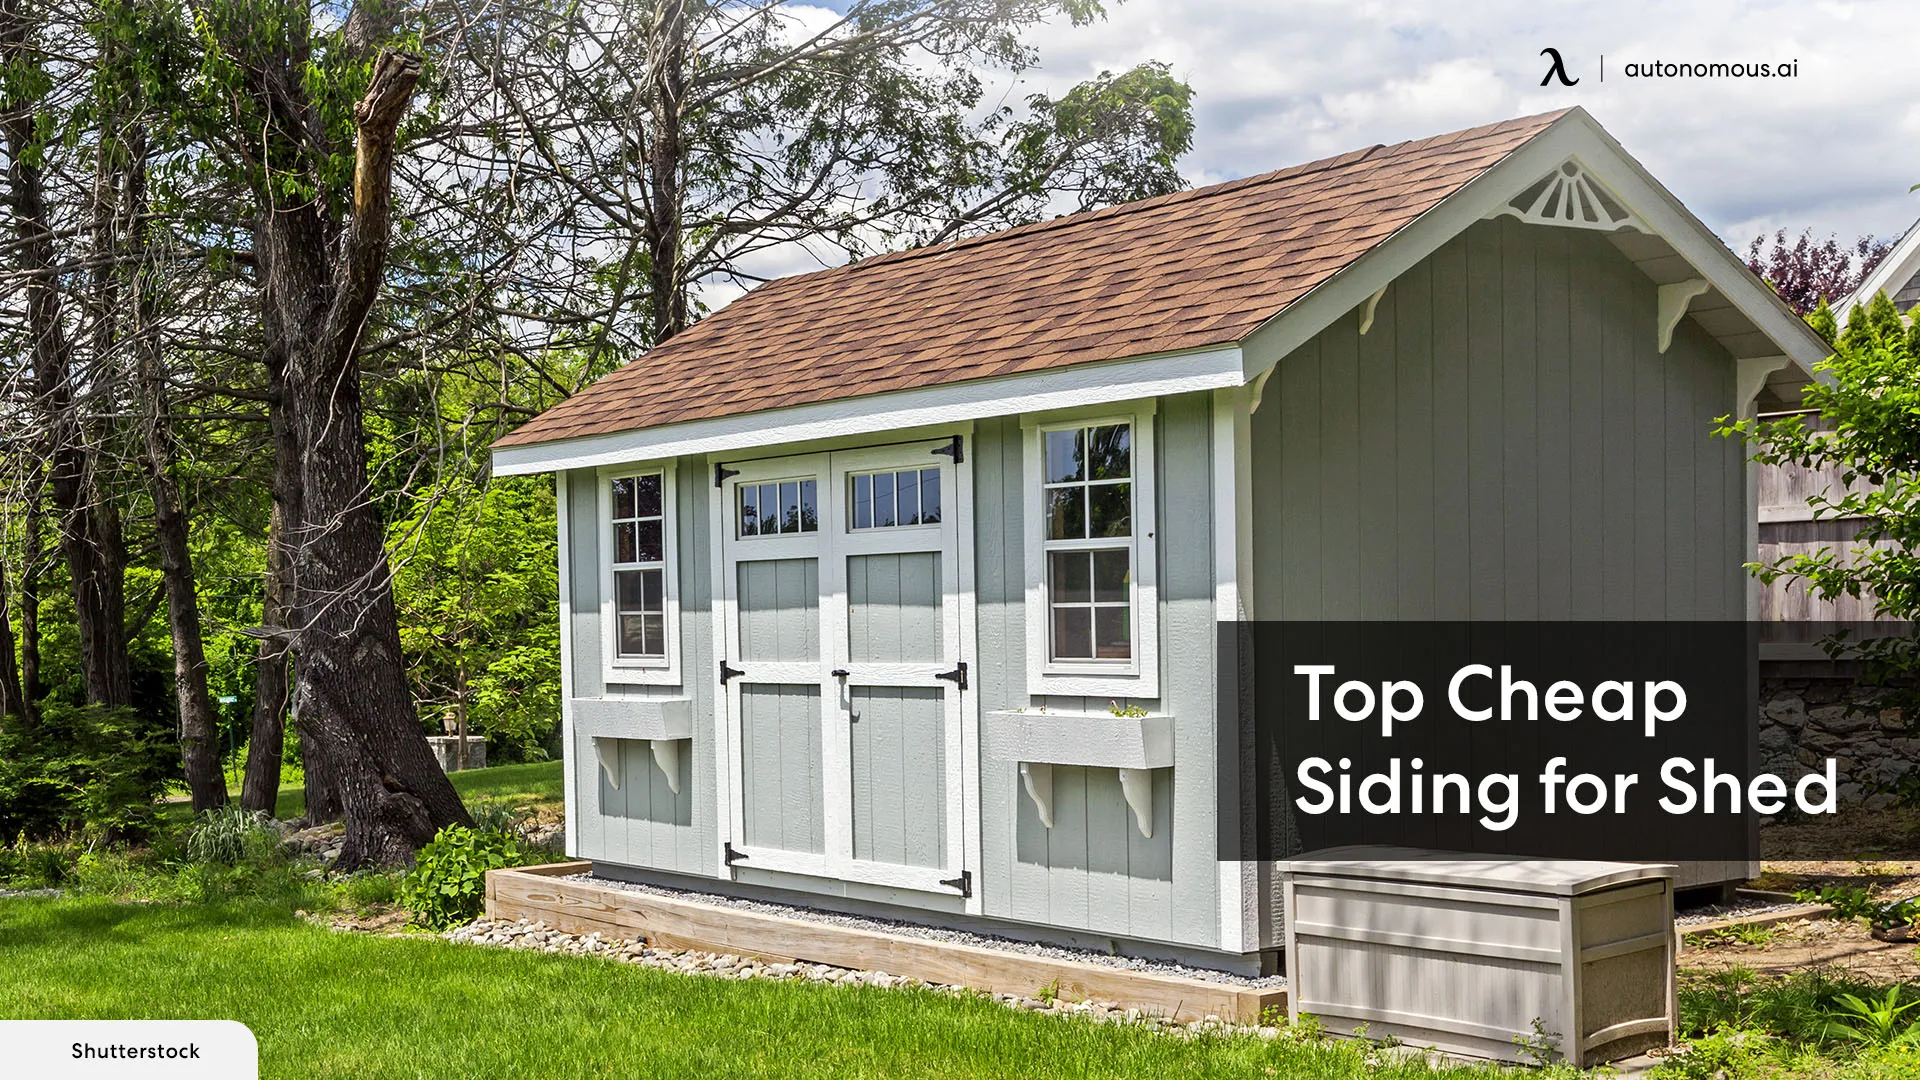 The Best Options for Cheap Siding for Shed